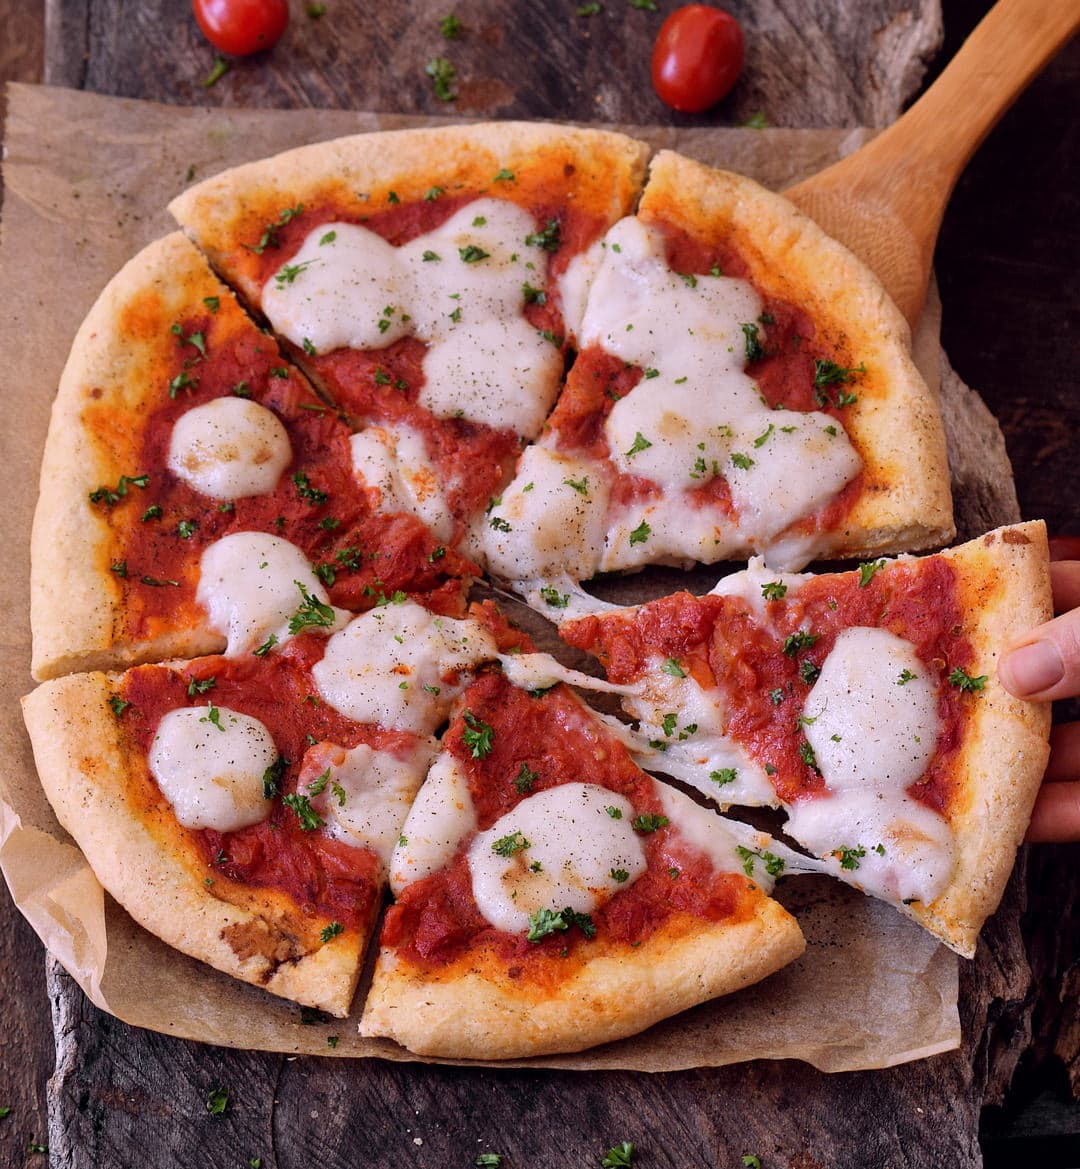 Best gluten-free pizza crust cut into 6 pieces with tomato sauce and vegan mozzarella. Gum-free, dairy-free, egg-free pizza dough